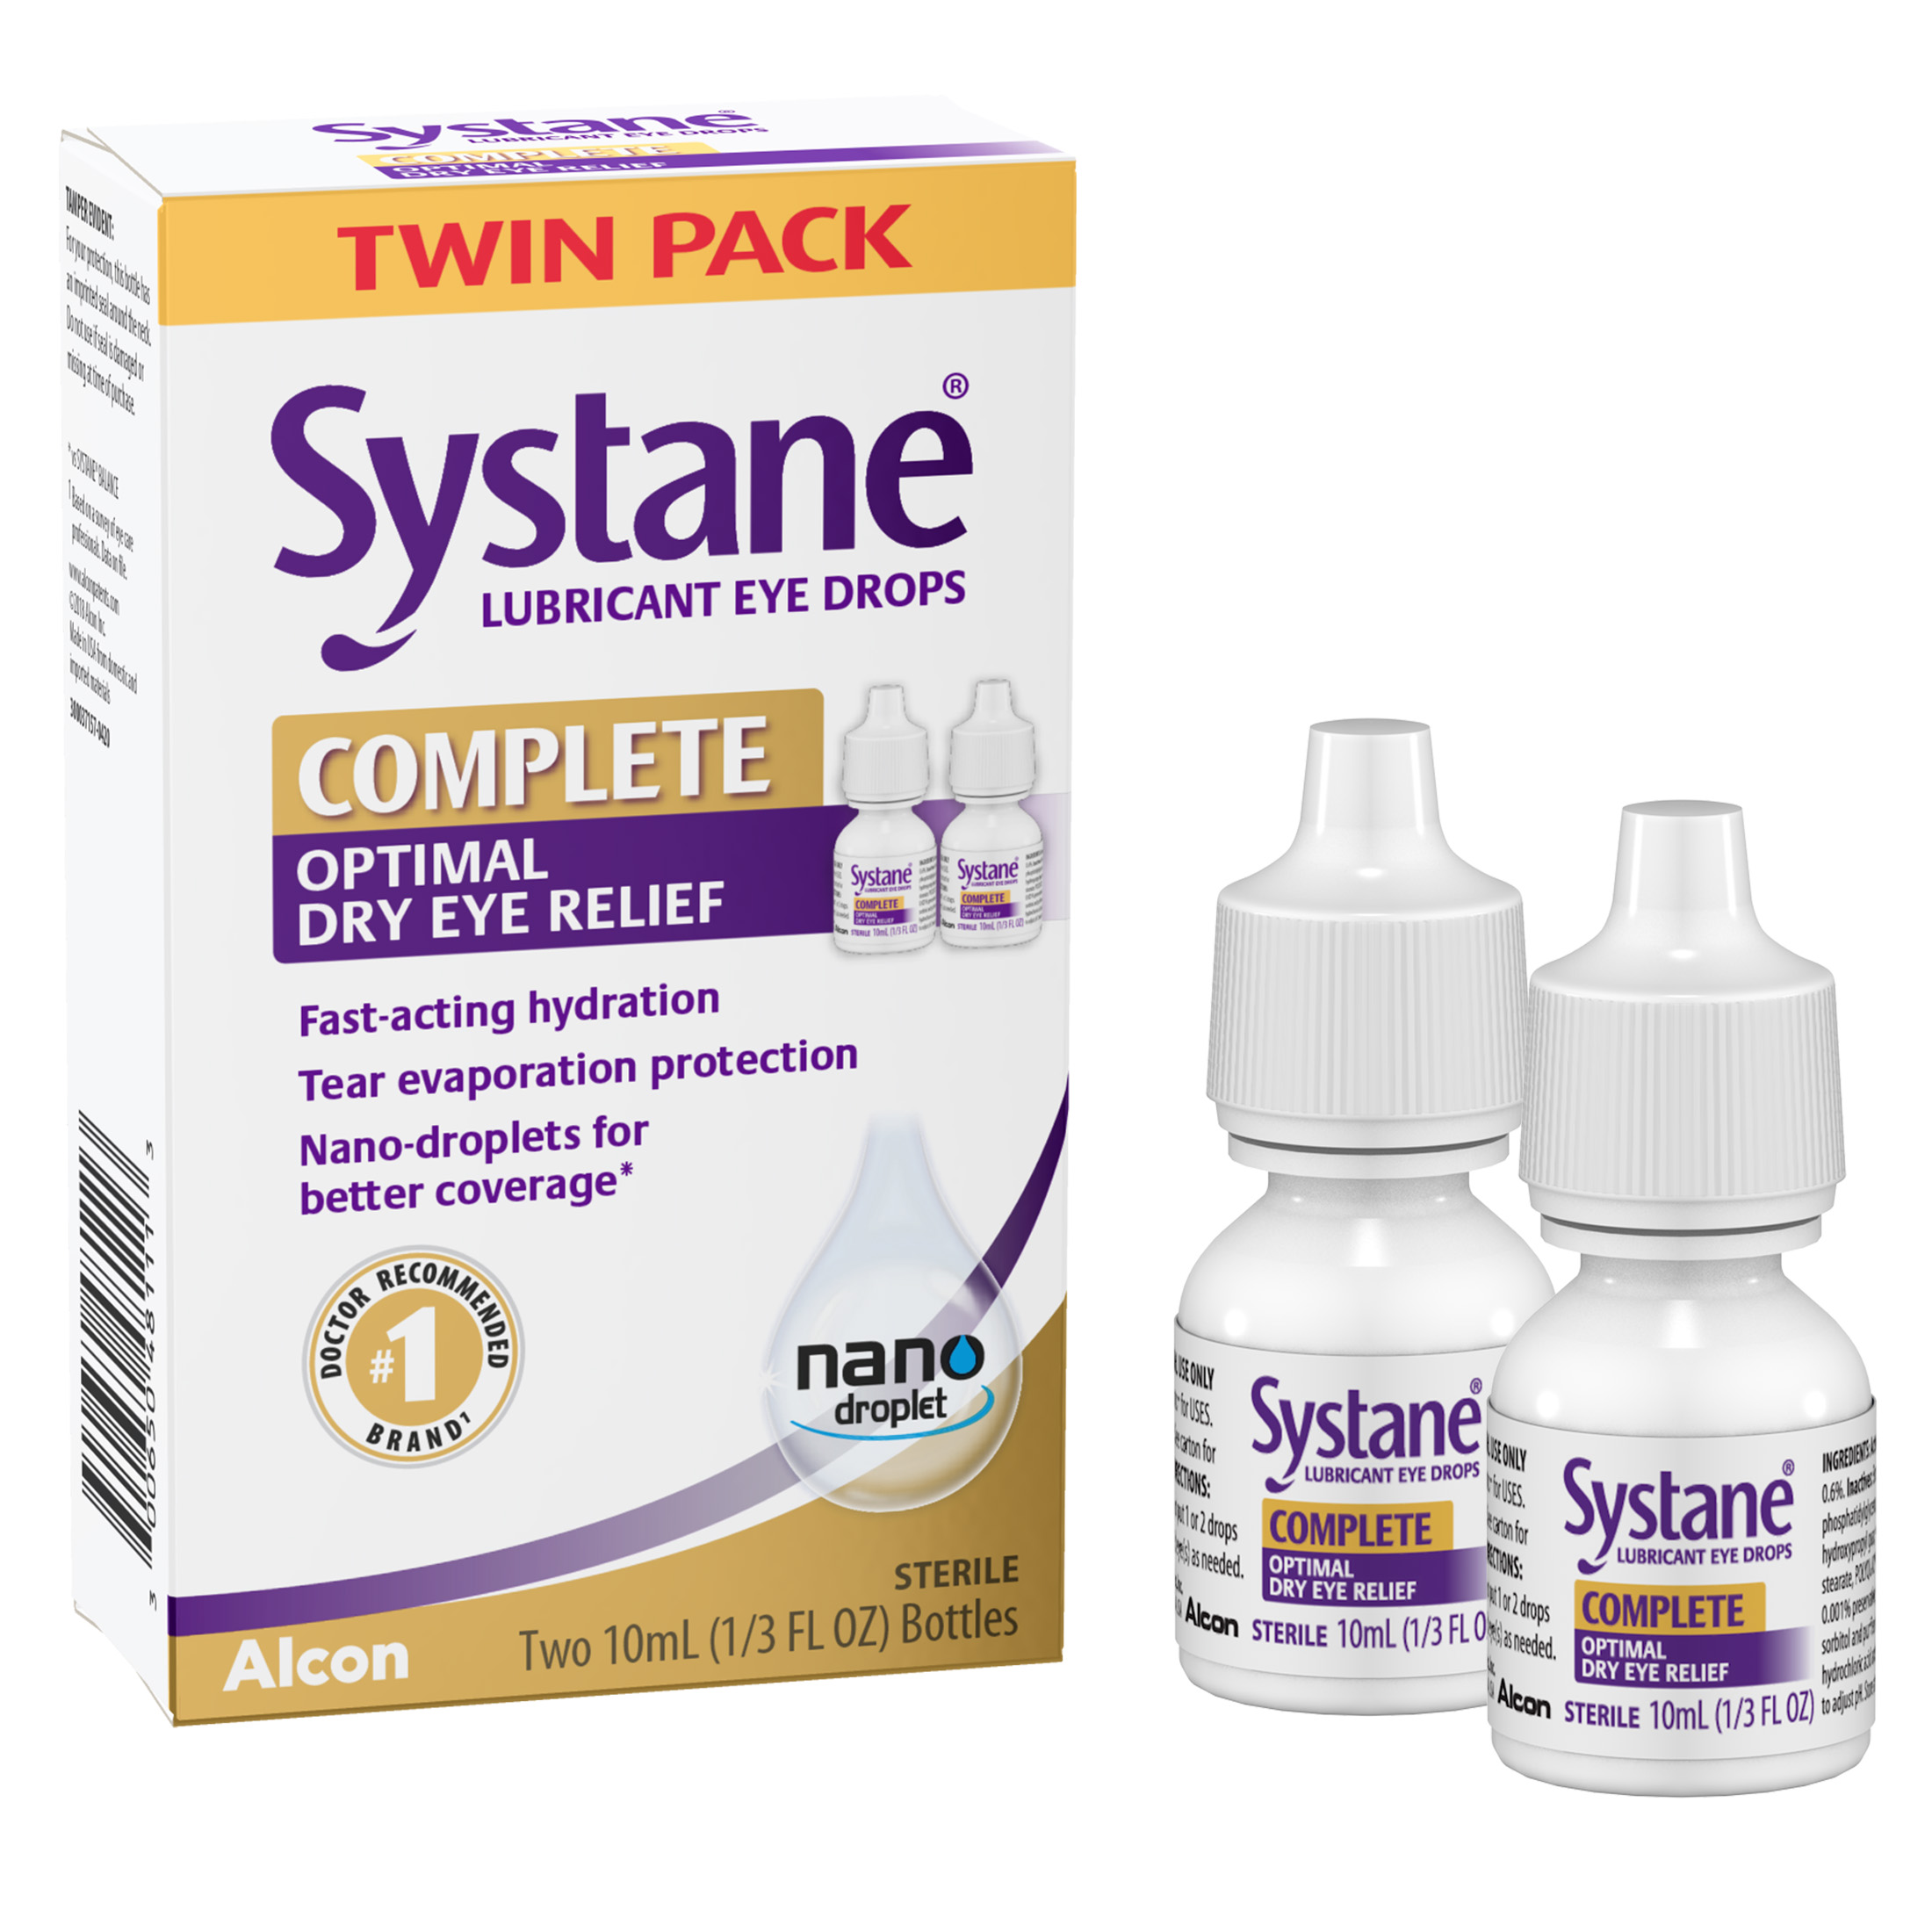 Systane Complete Dry Eye Care Symptom Relief Eye Drops, Artificial Tears, Twin Pack - image 1 of 5